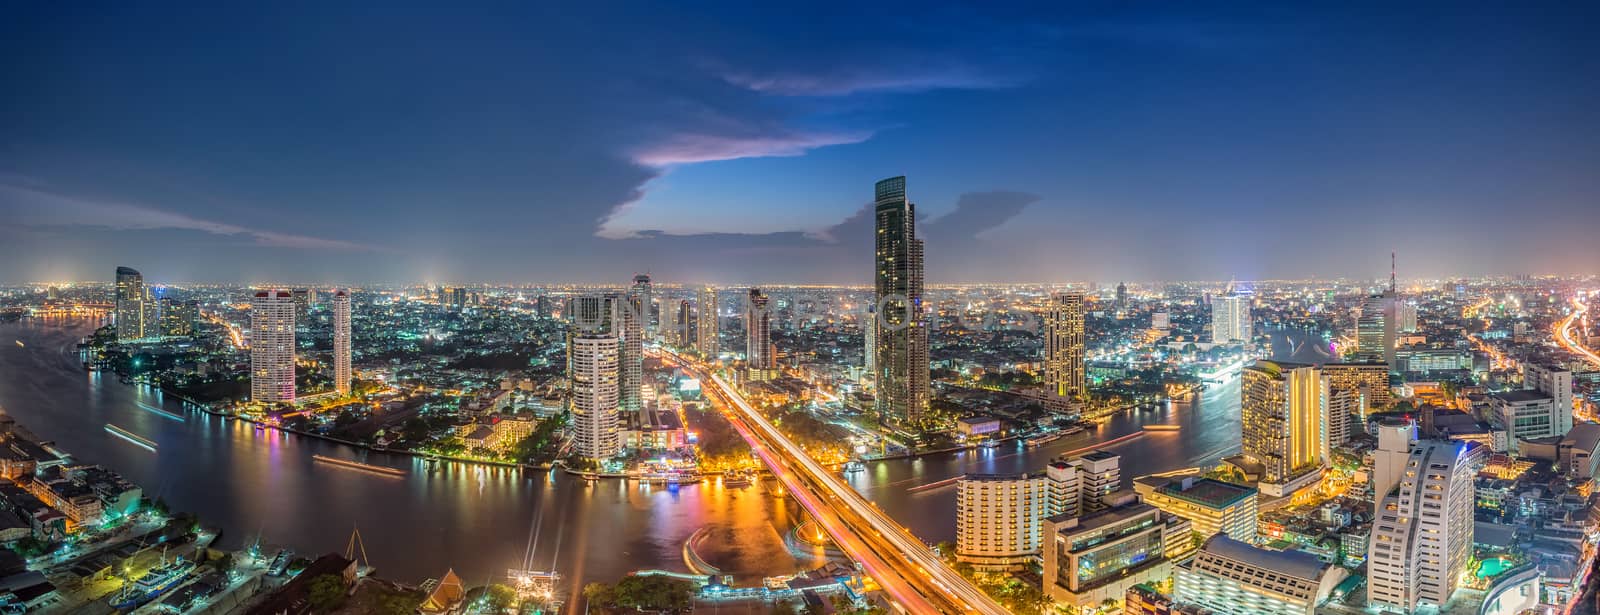 Bangkok Transportation at Dusk with Modern Business Building alo by chanwity